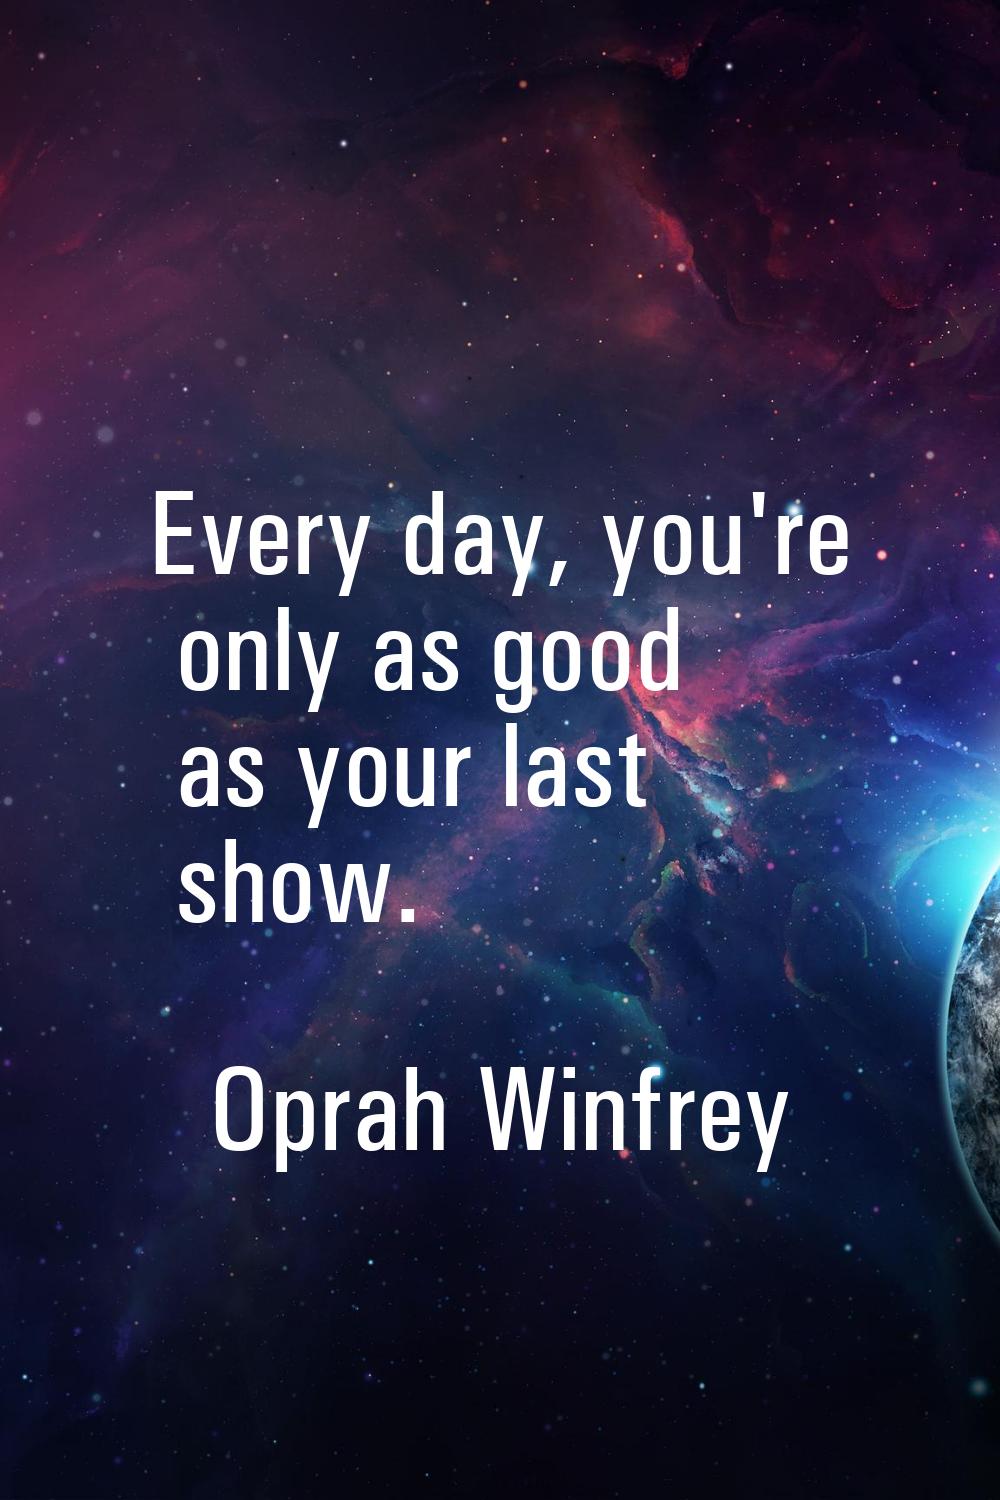 Every day, you're only as good as your last show.